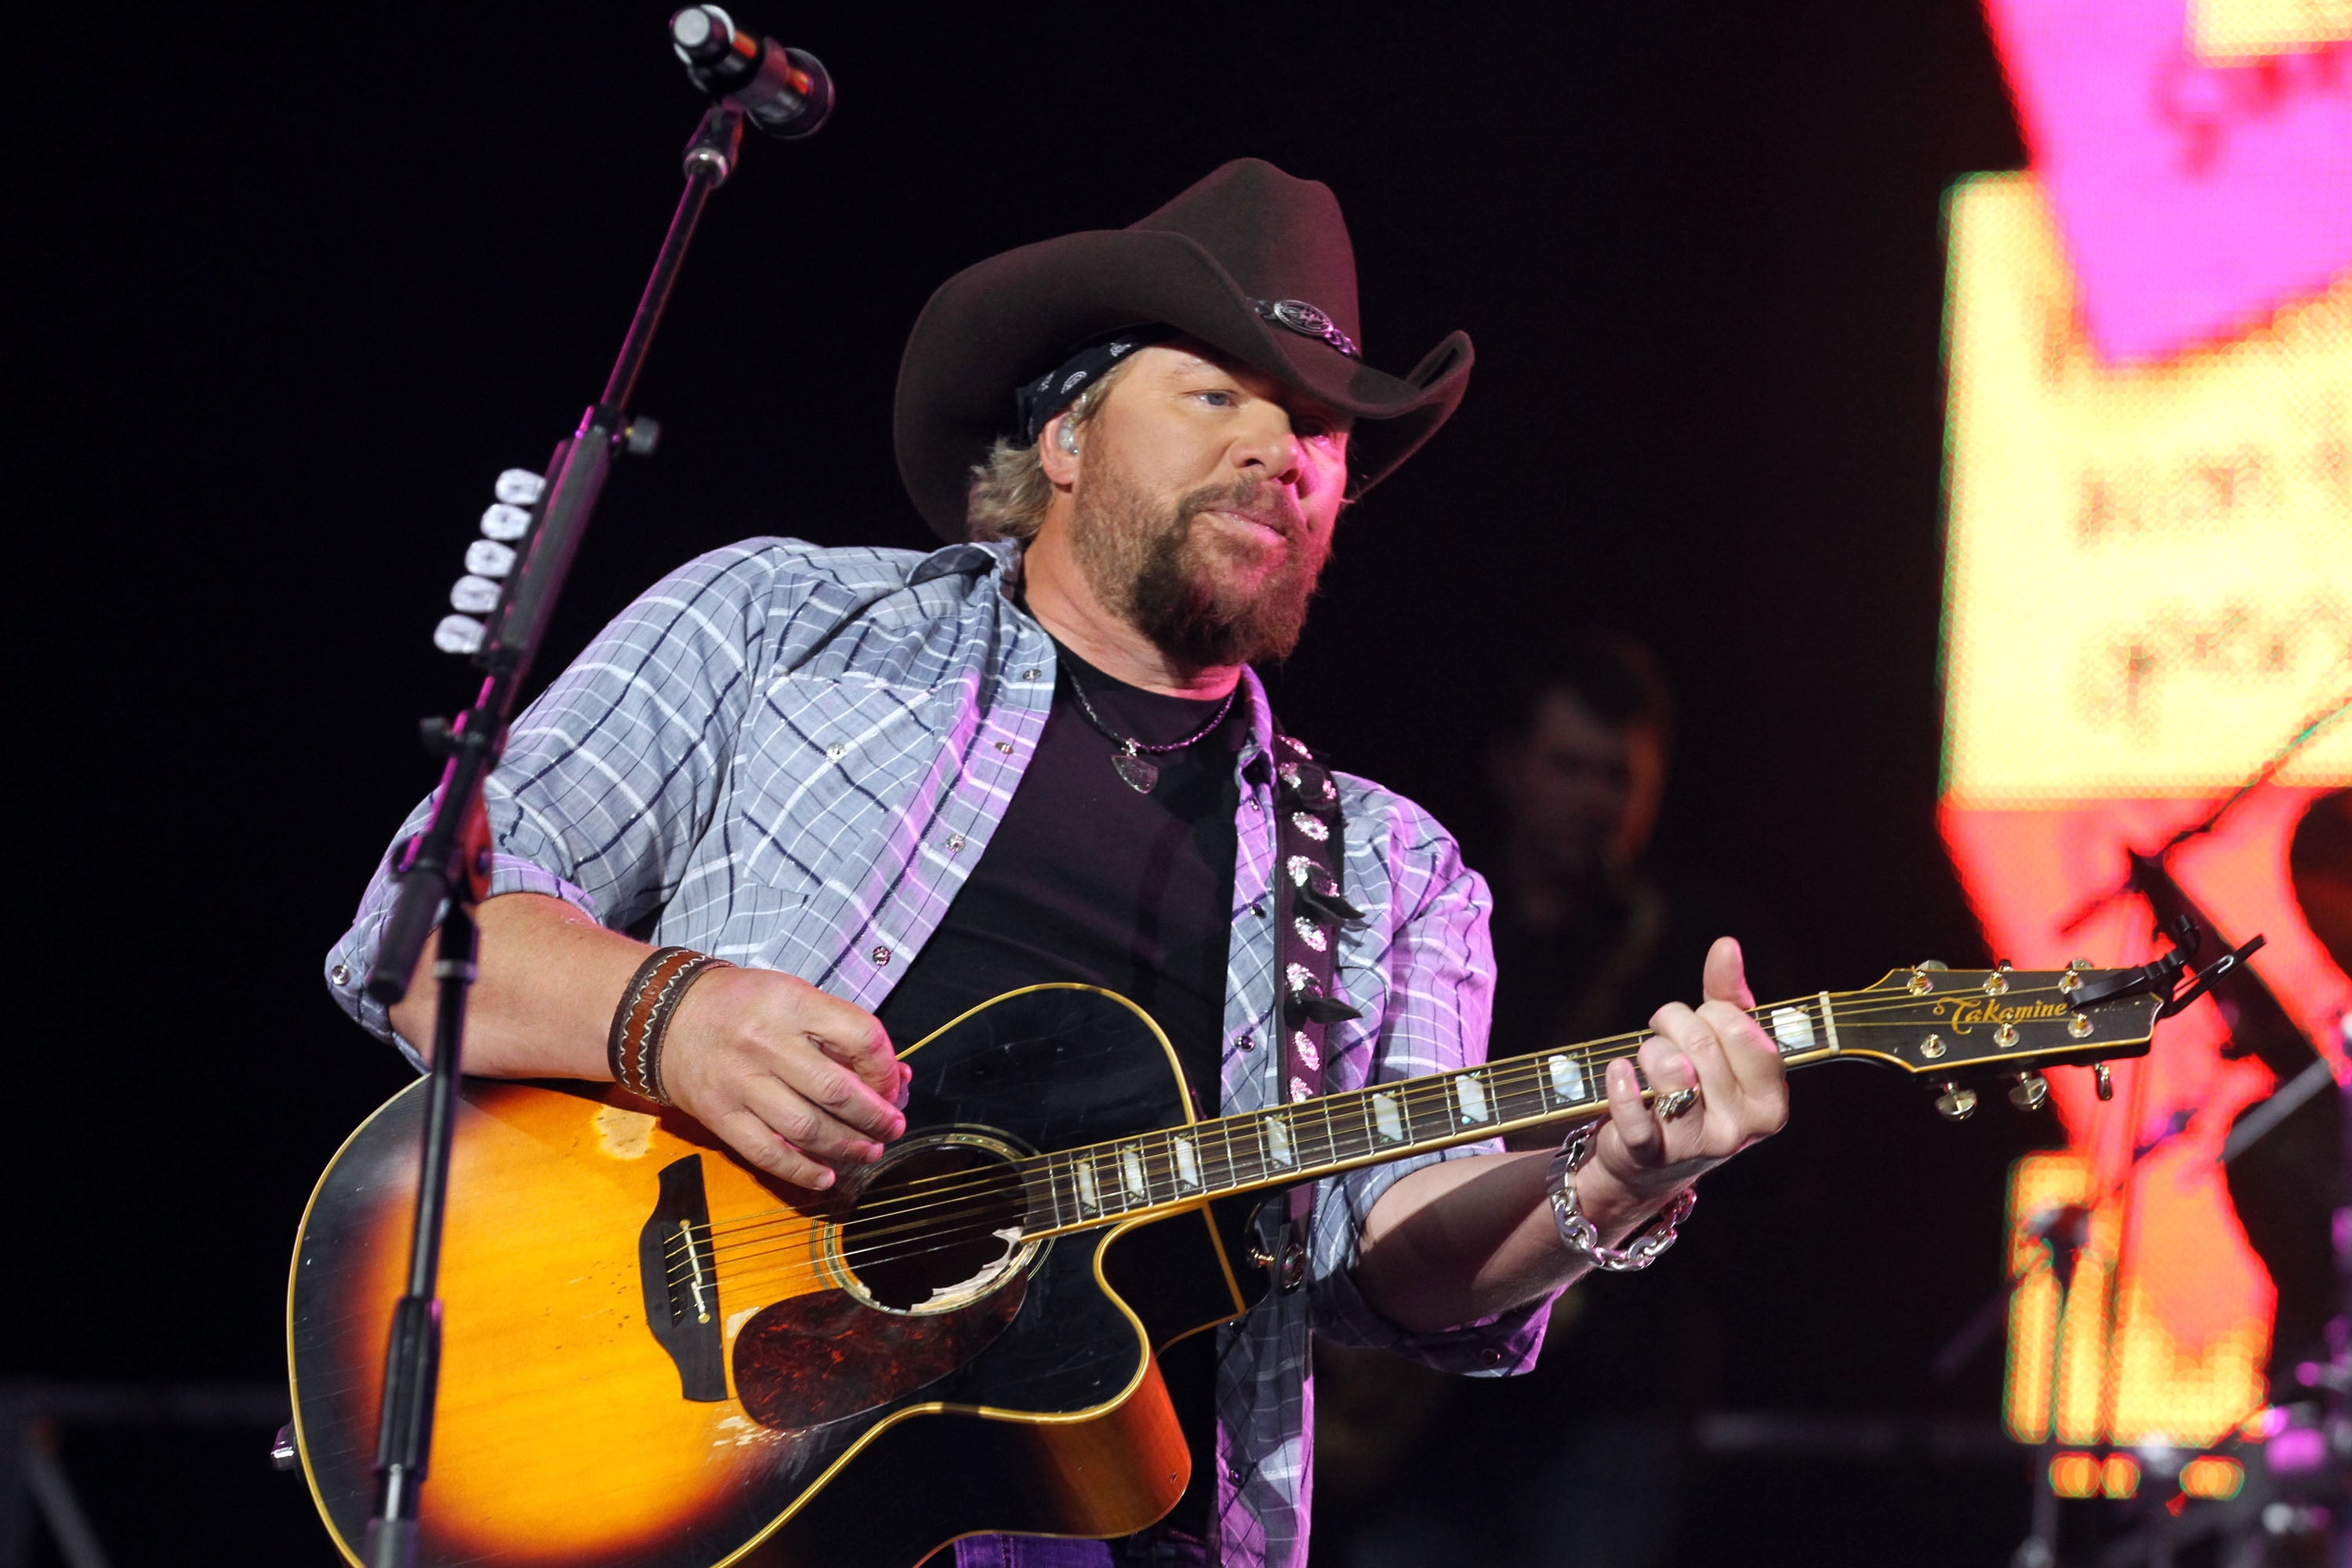 Toby Keith on stage in Indio, California in 2010